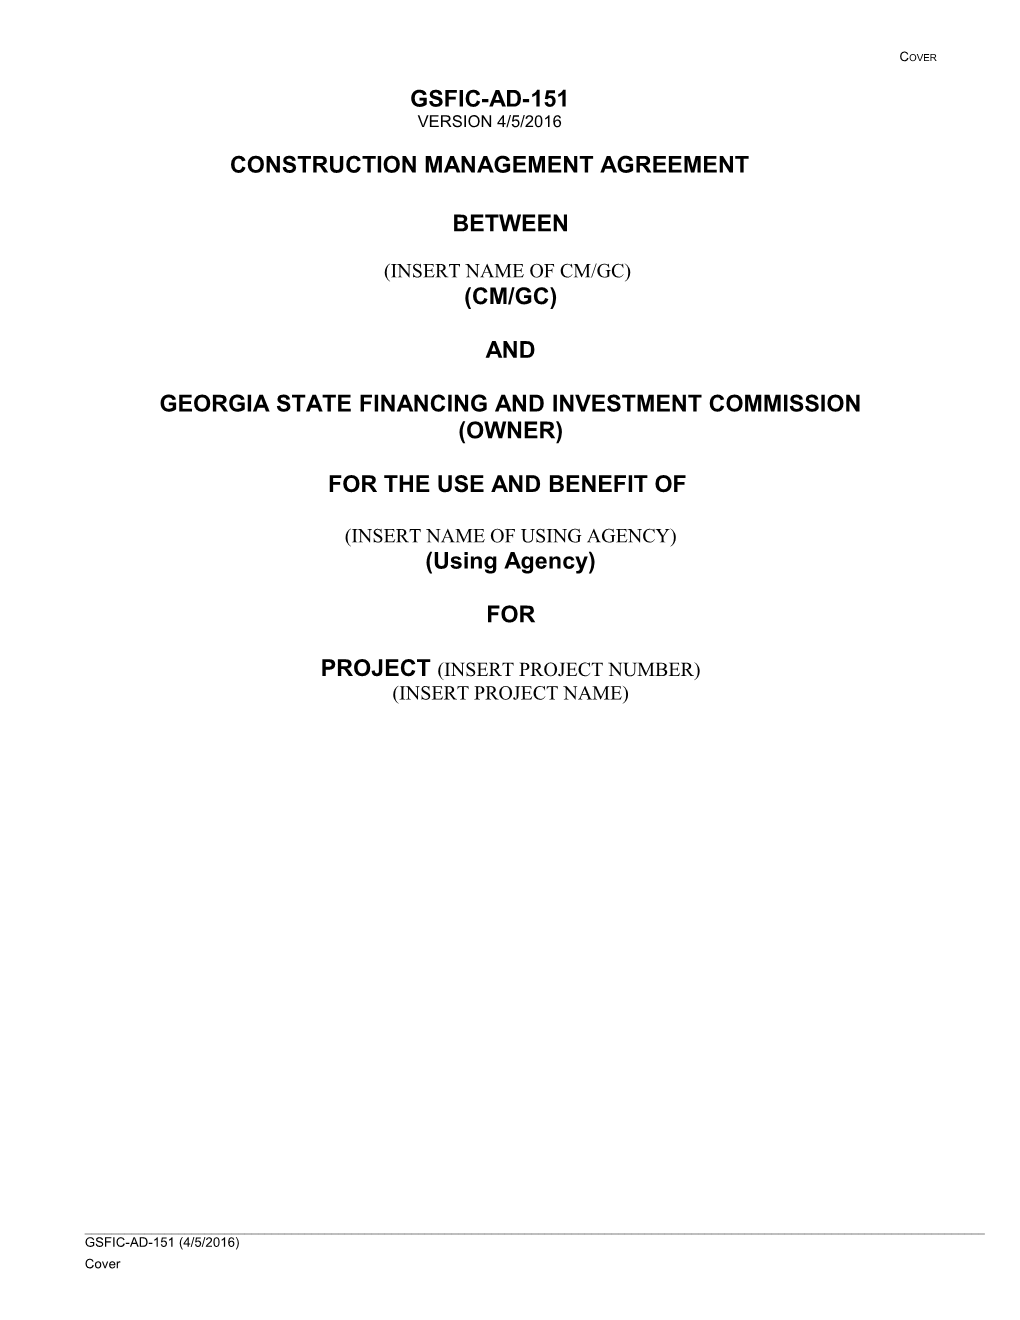 Georgia State Financing and Investment Commission